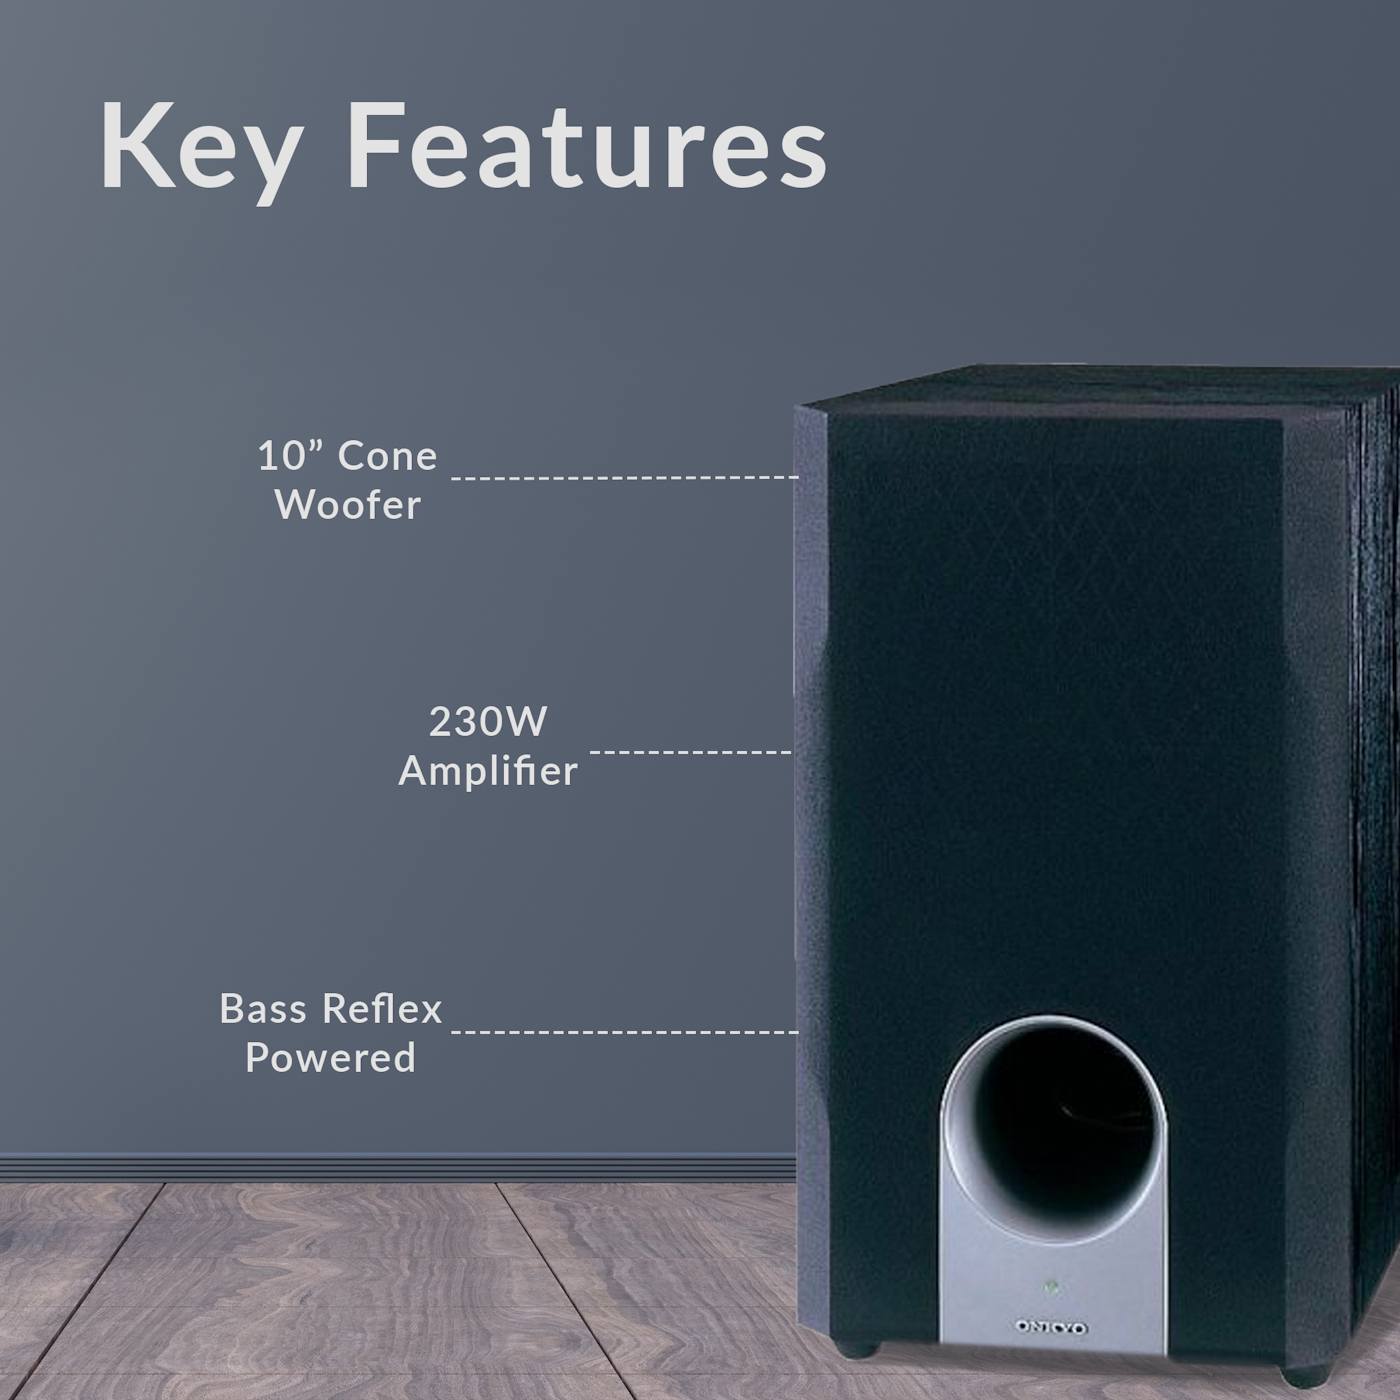 Key Features of an Onkyo amplifier called out on a wooden surface